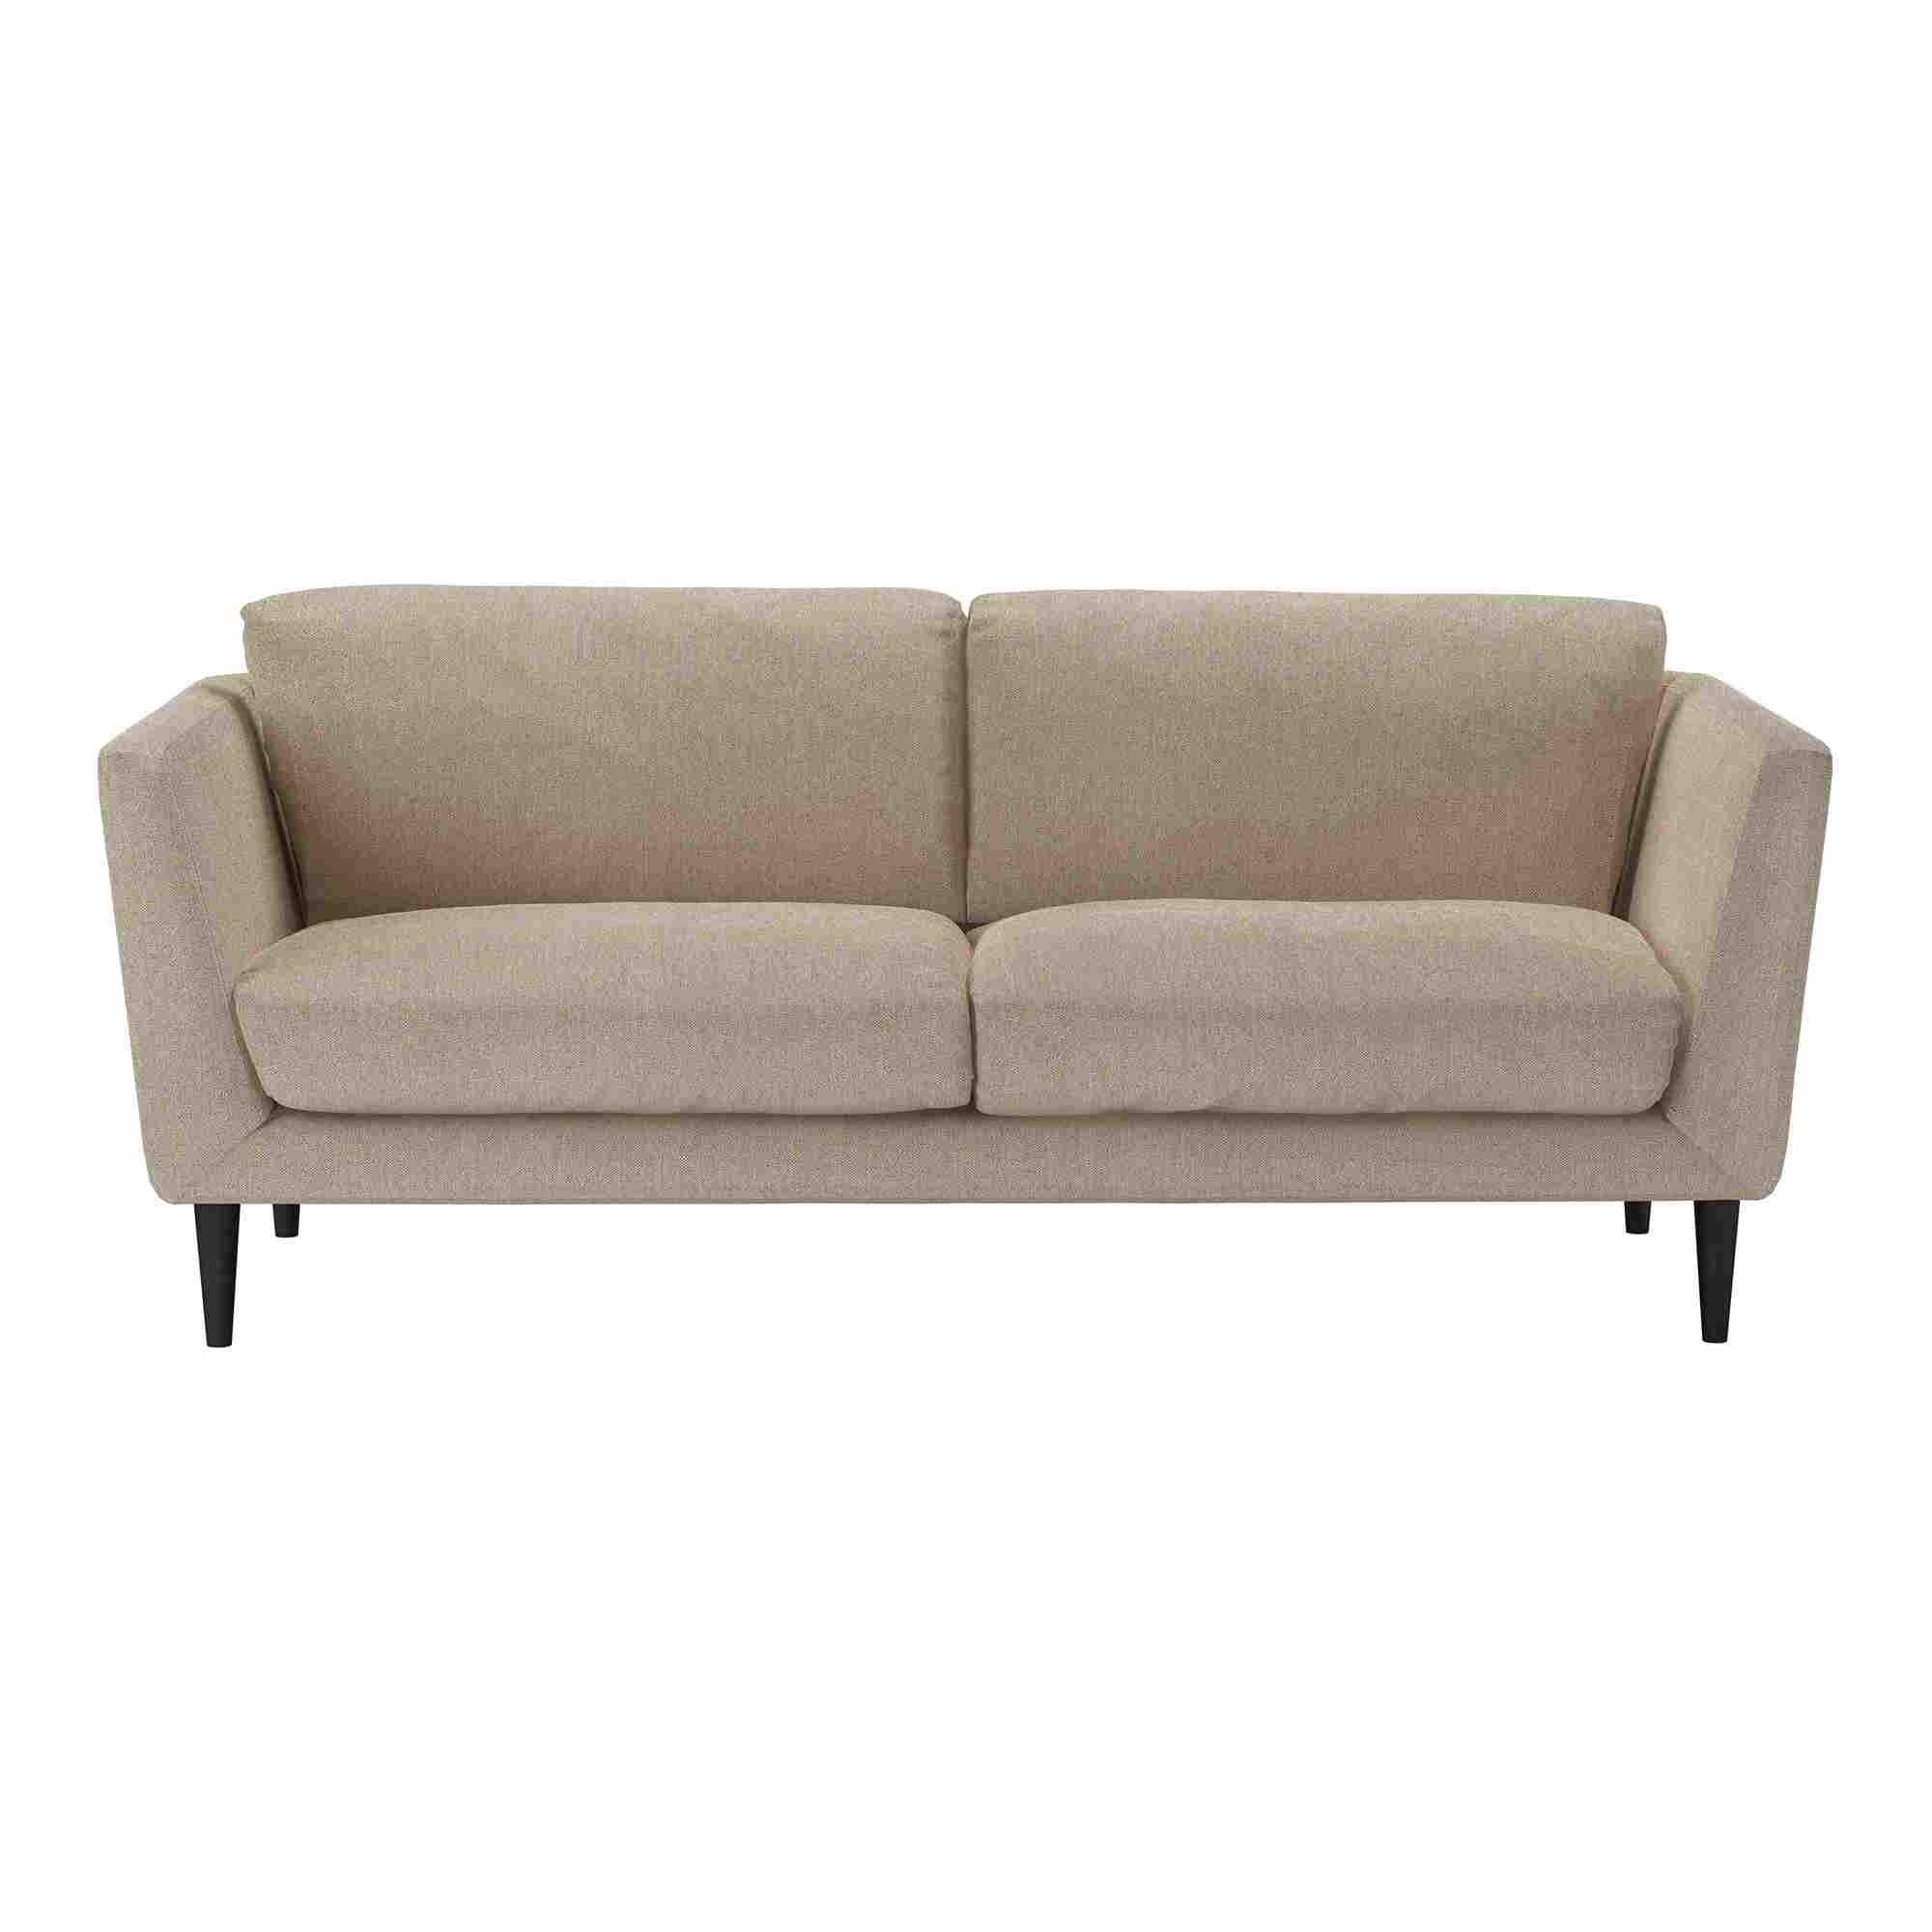 Holly Cashew Baylee Viscose Linen Sofa - 2.5 Seater